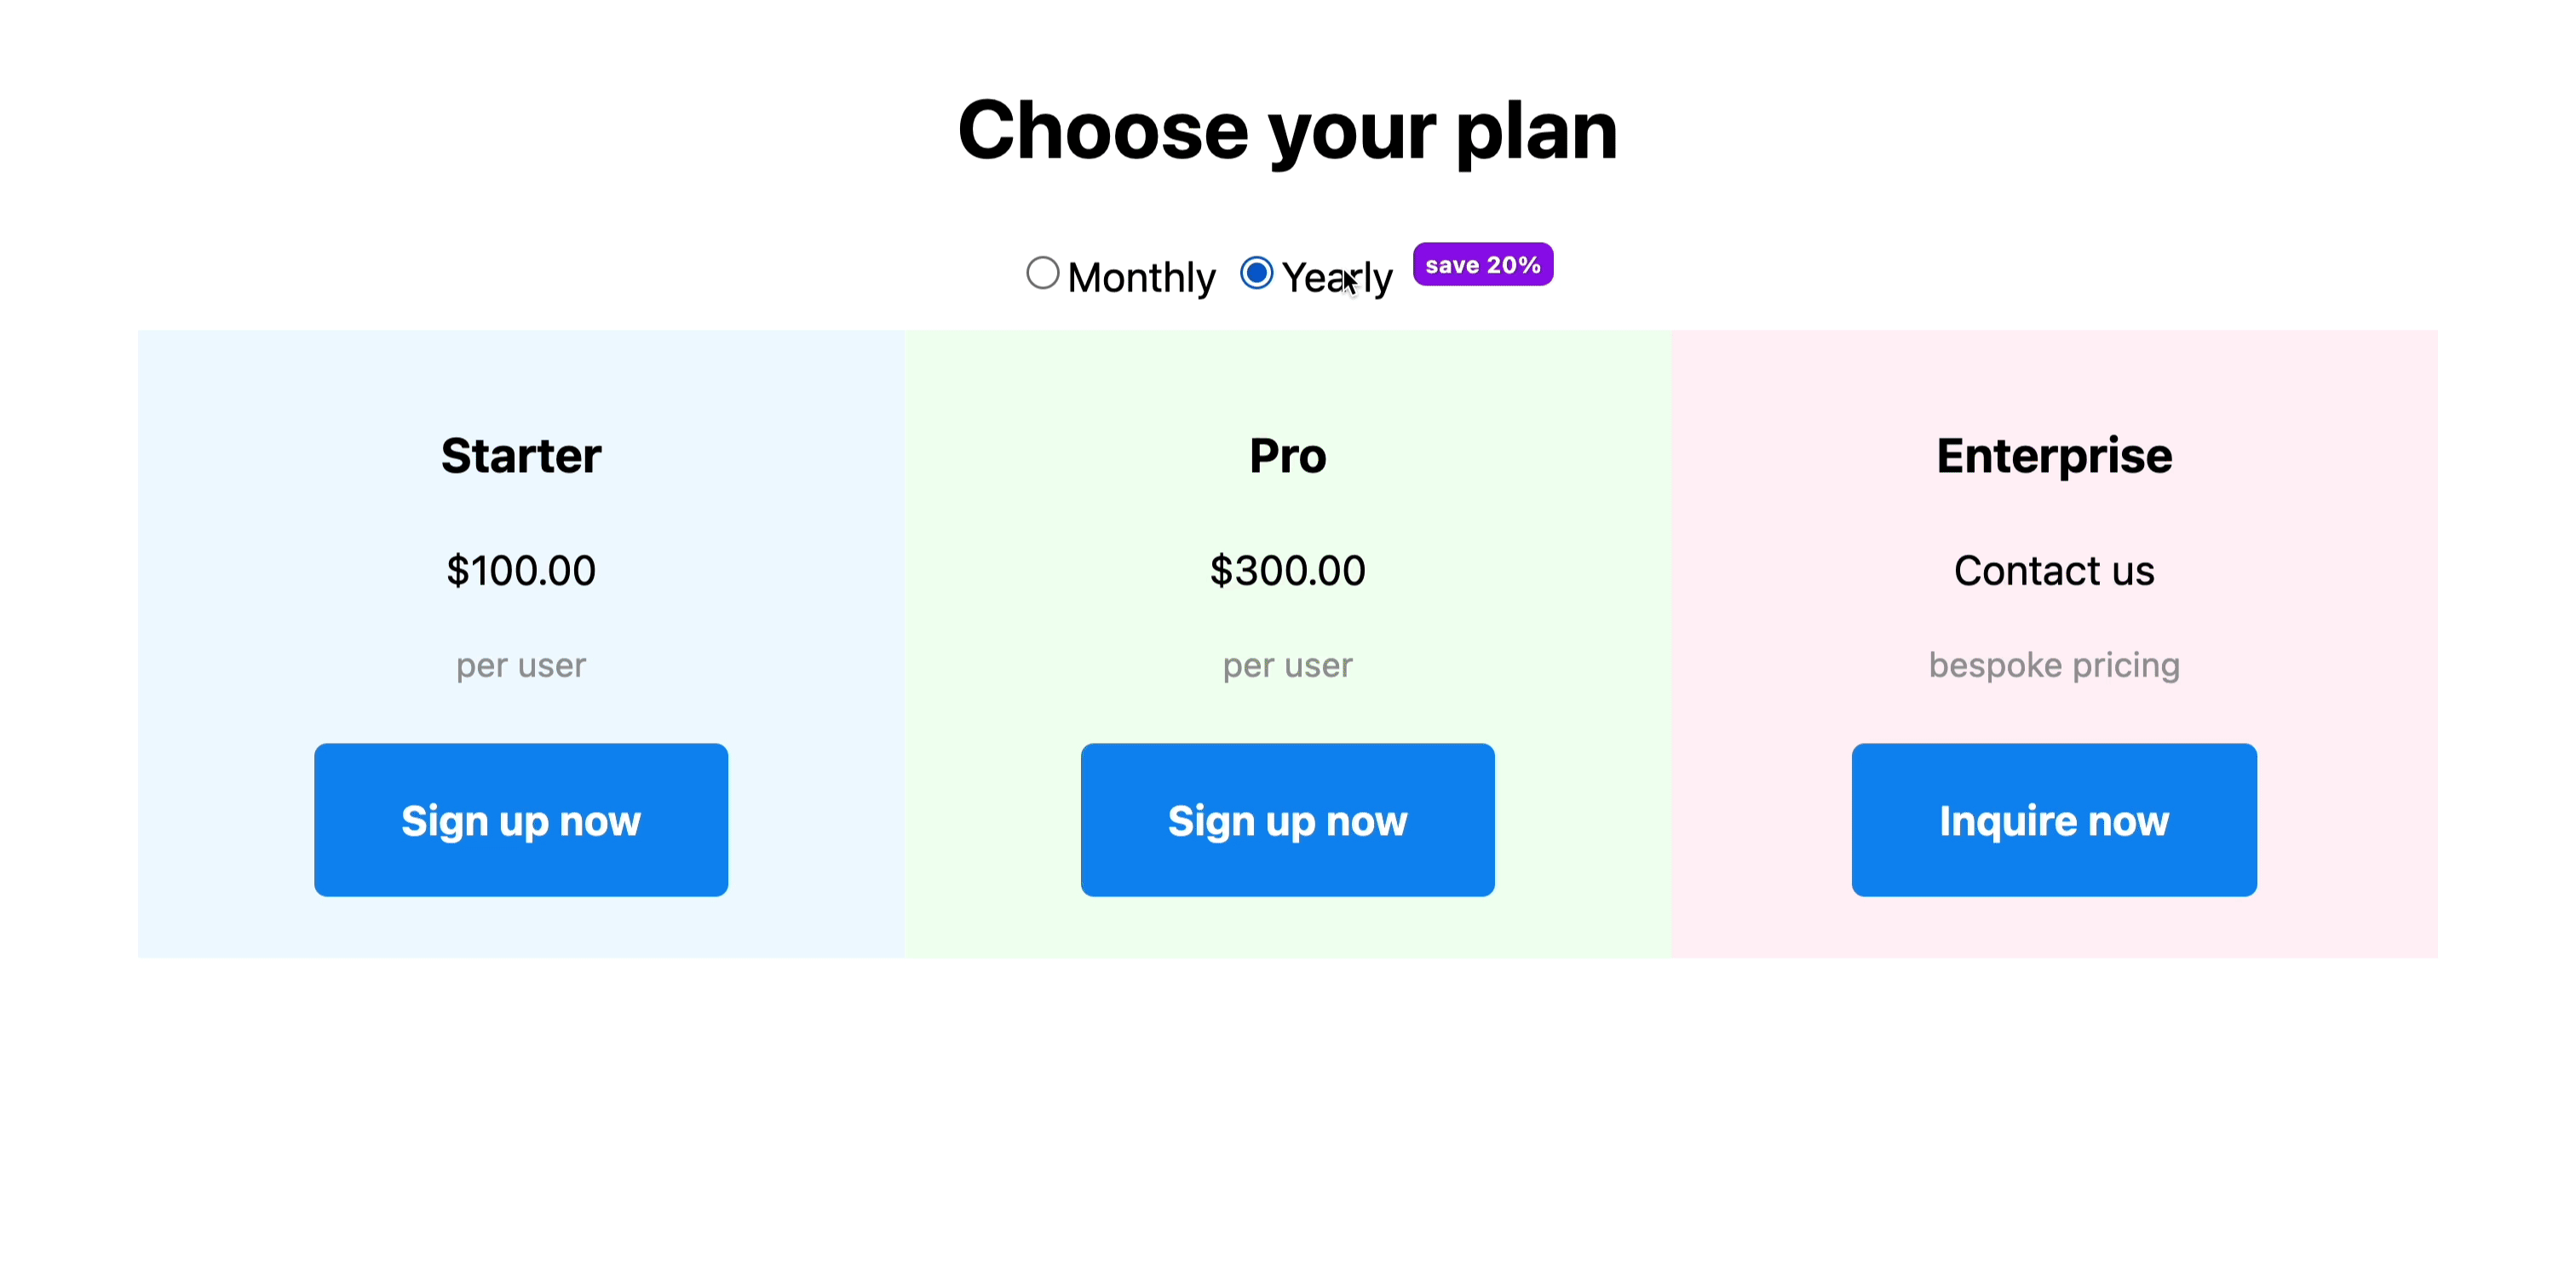 Short animation showing toggling between monthly and annual pricing. The prices change when the monthly and annual radio buttons are clicked.